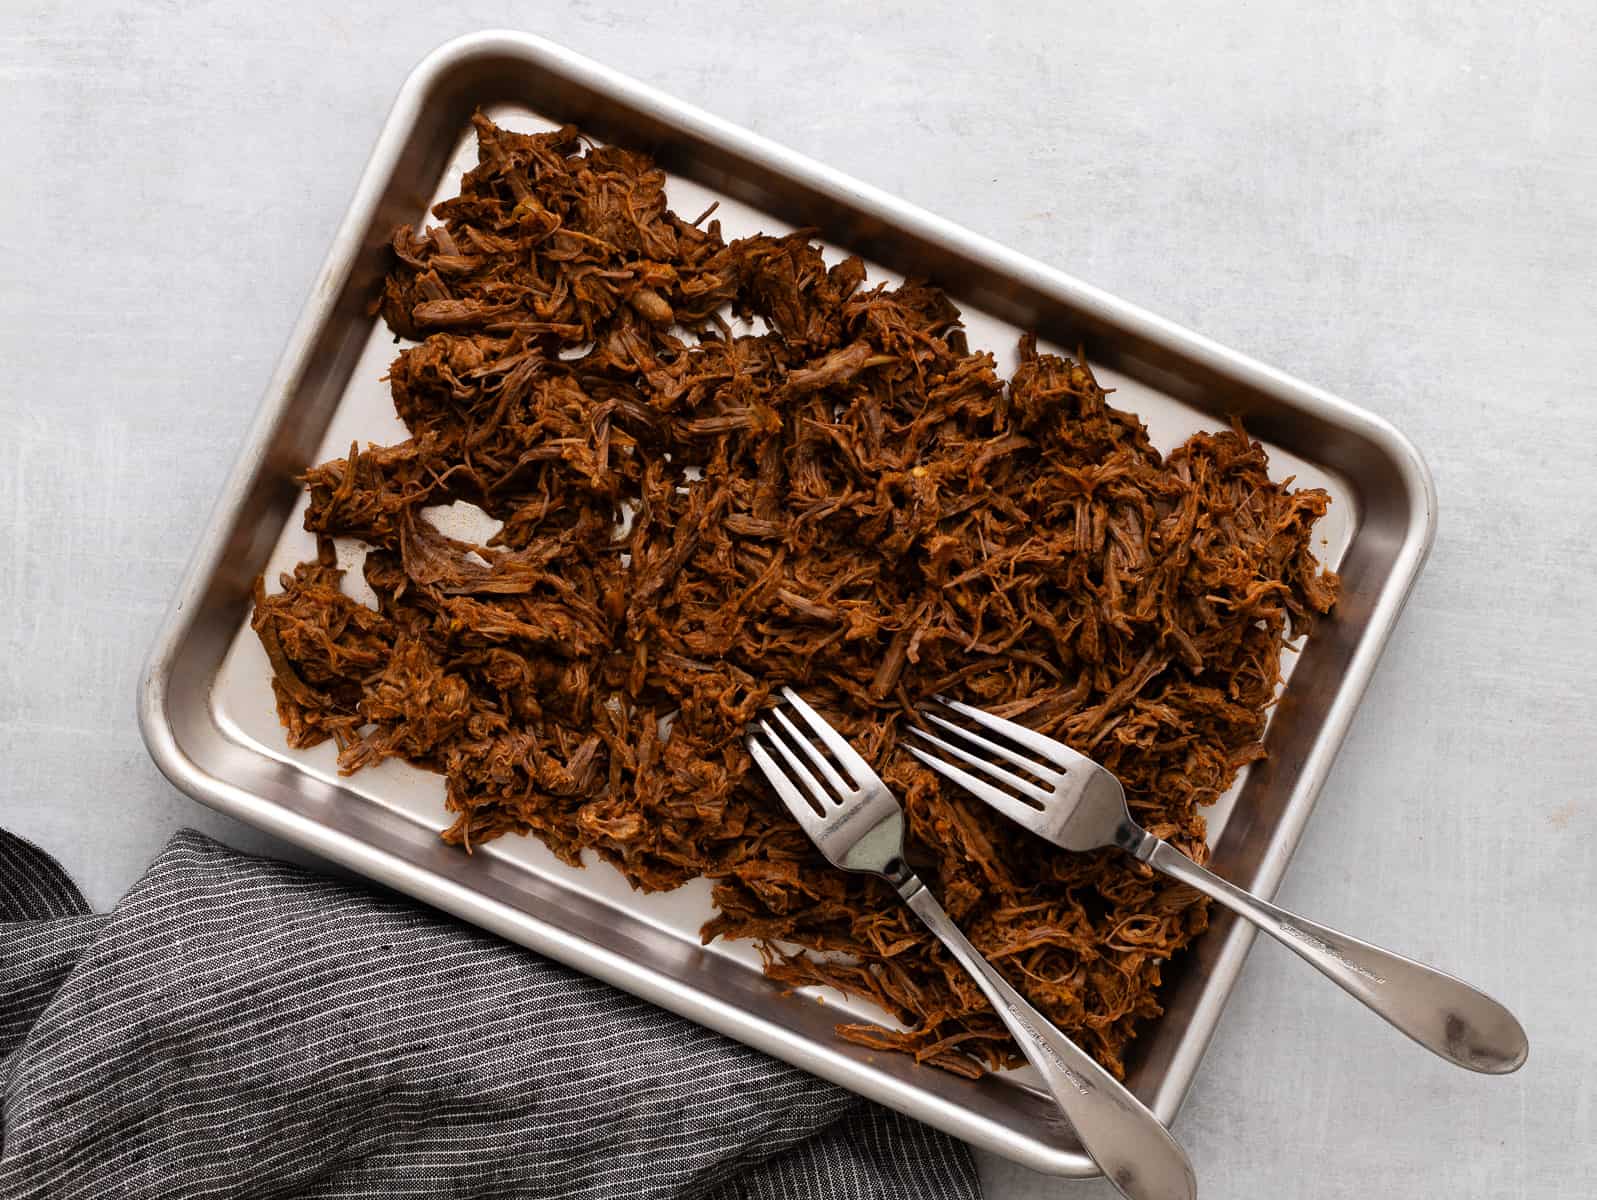 Shredded beef on a baking sheet with forks.